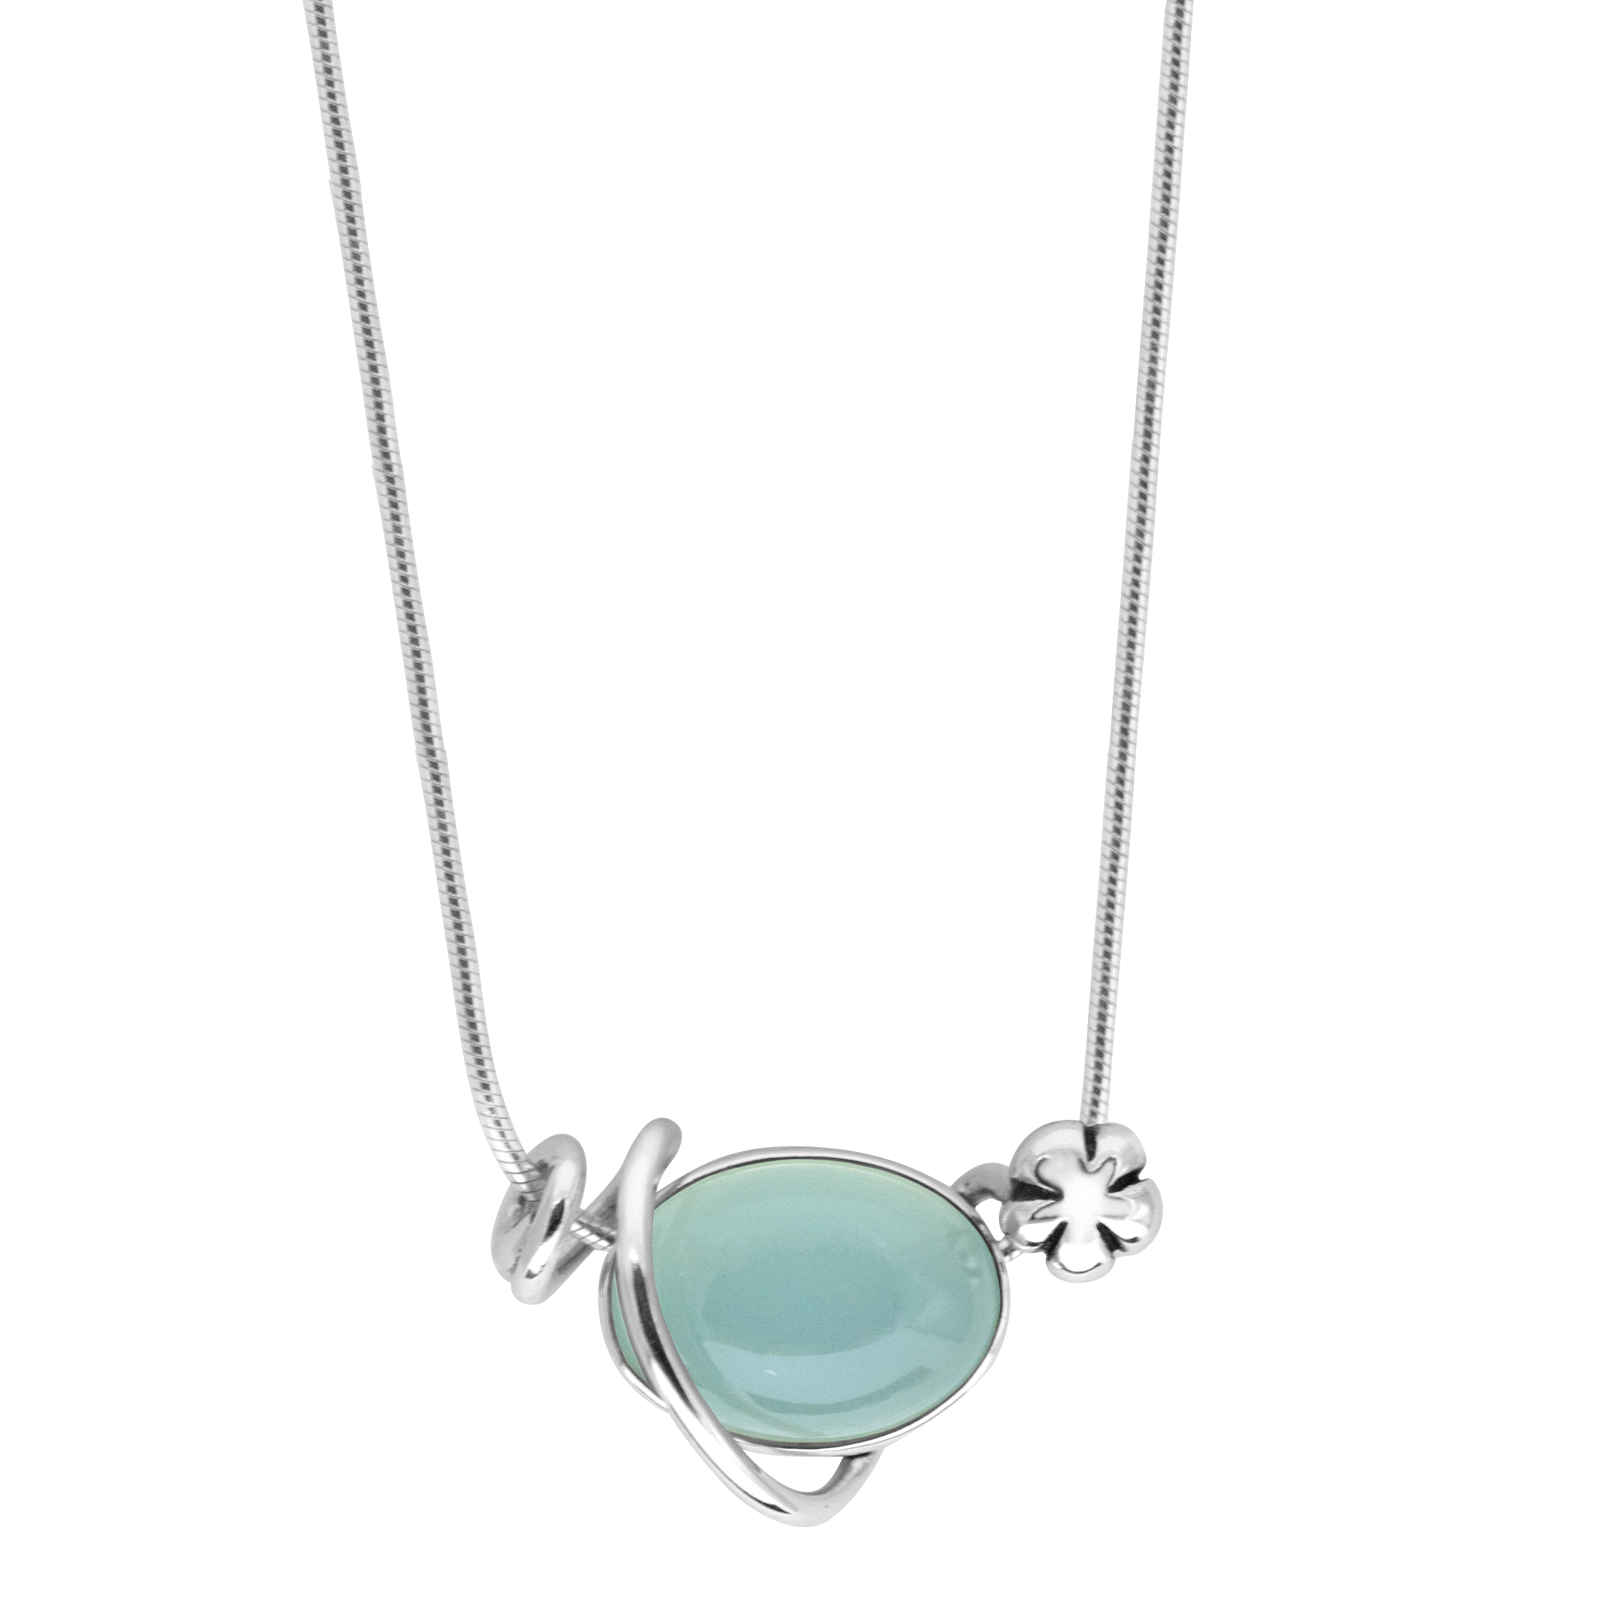 Collier - Blurred Blue calcedon